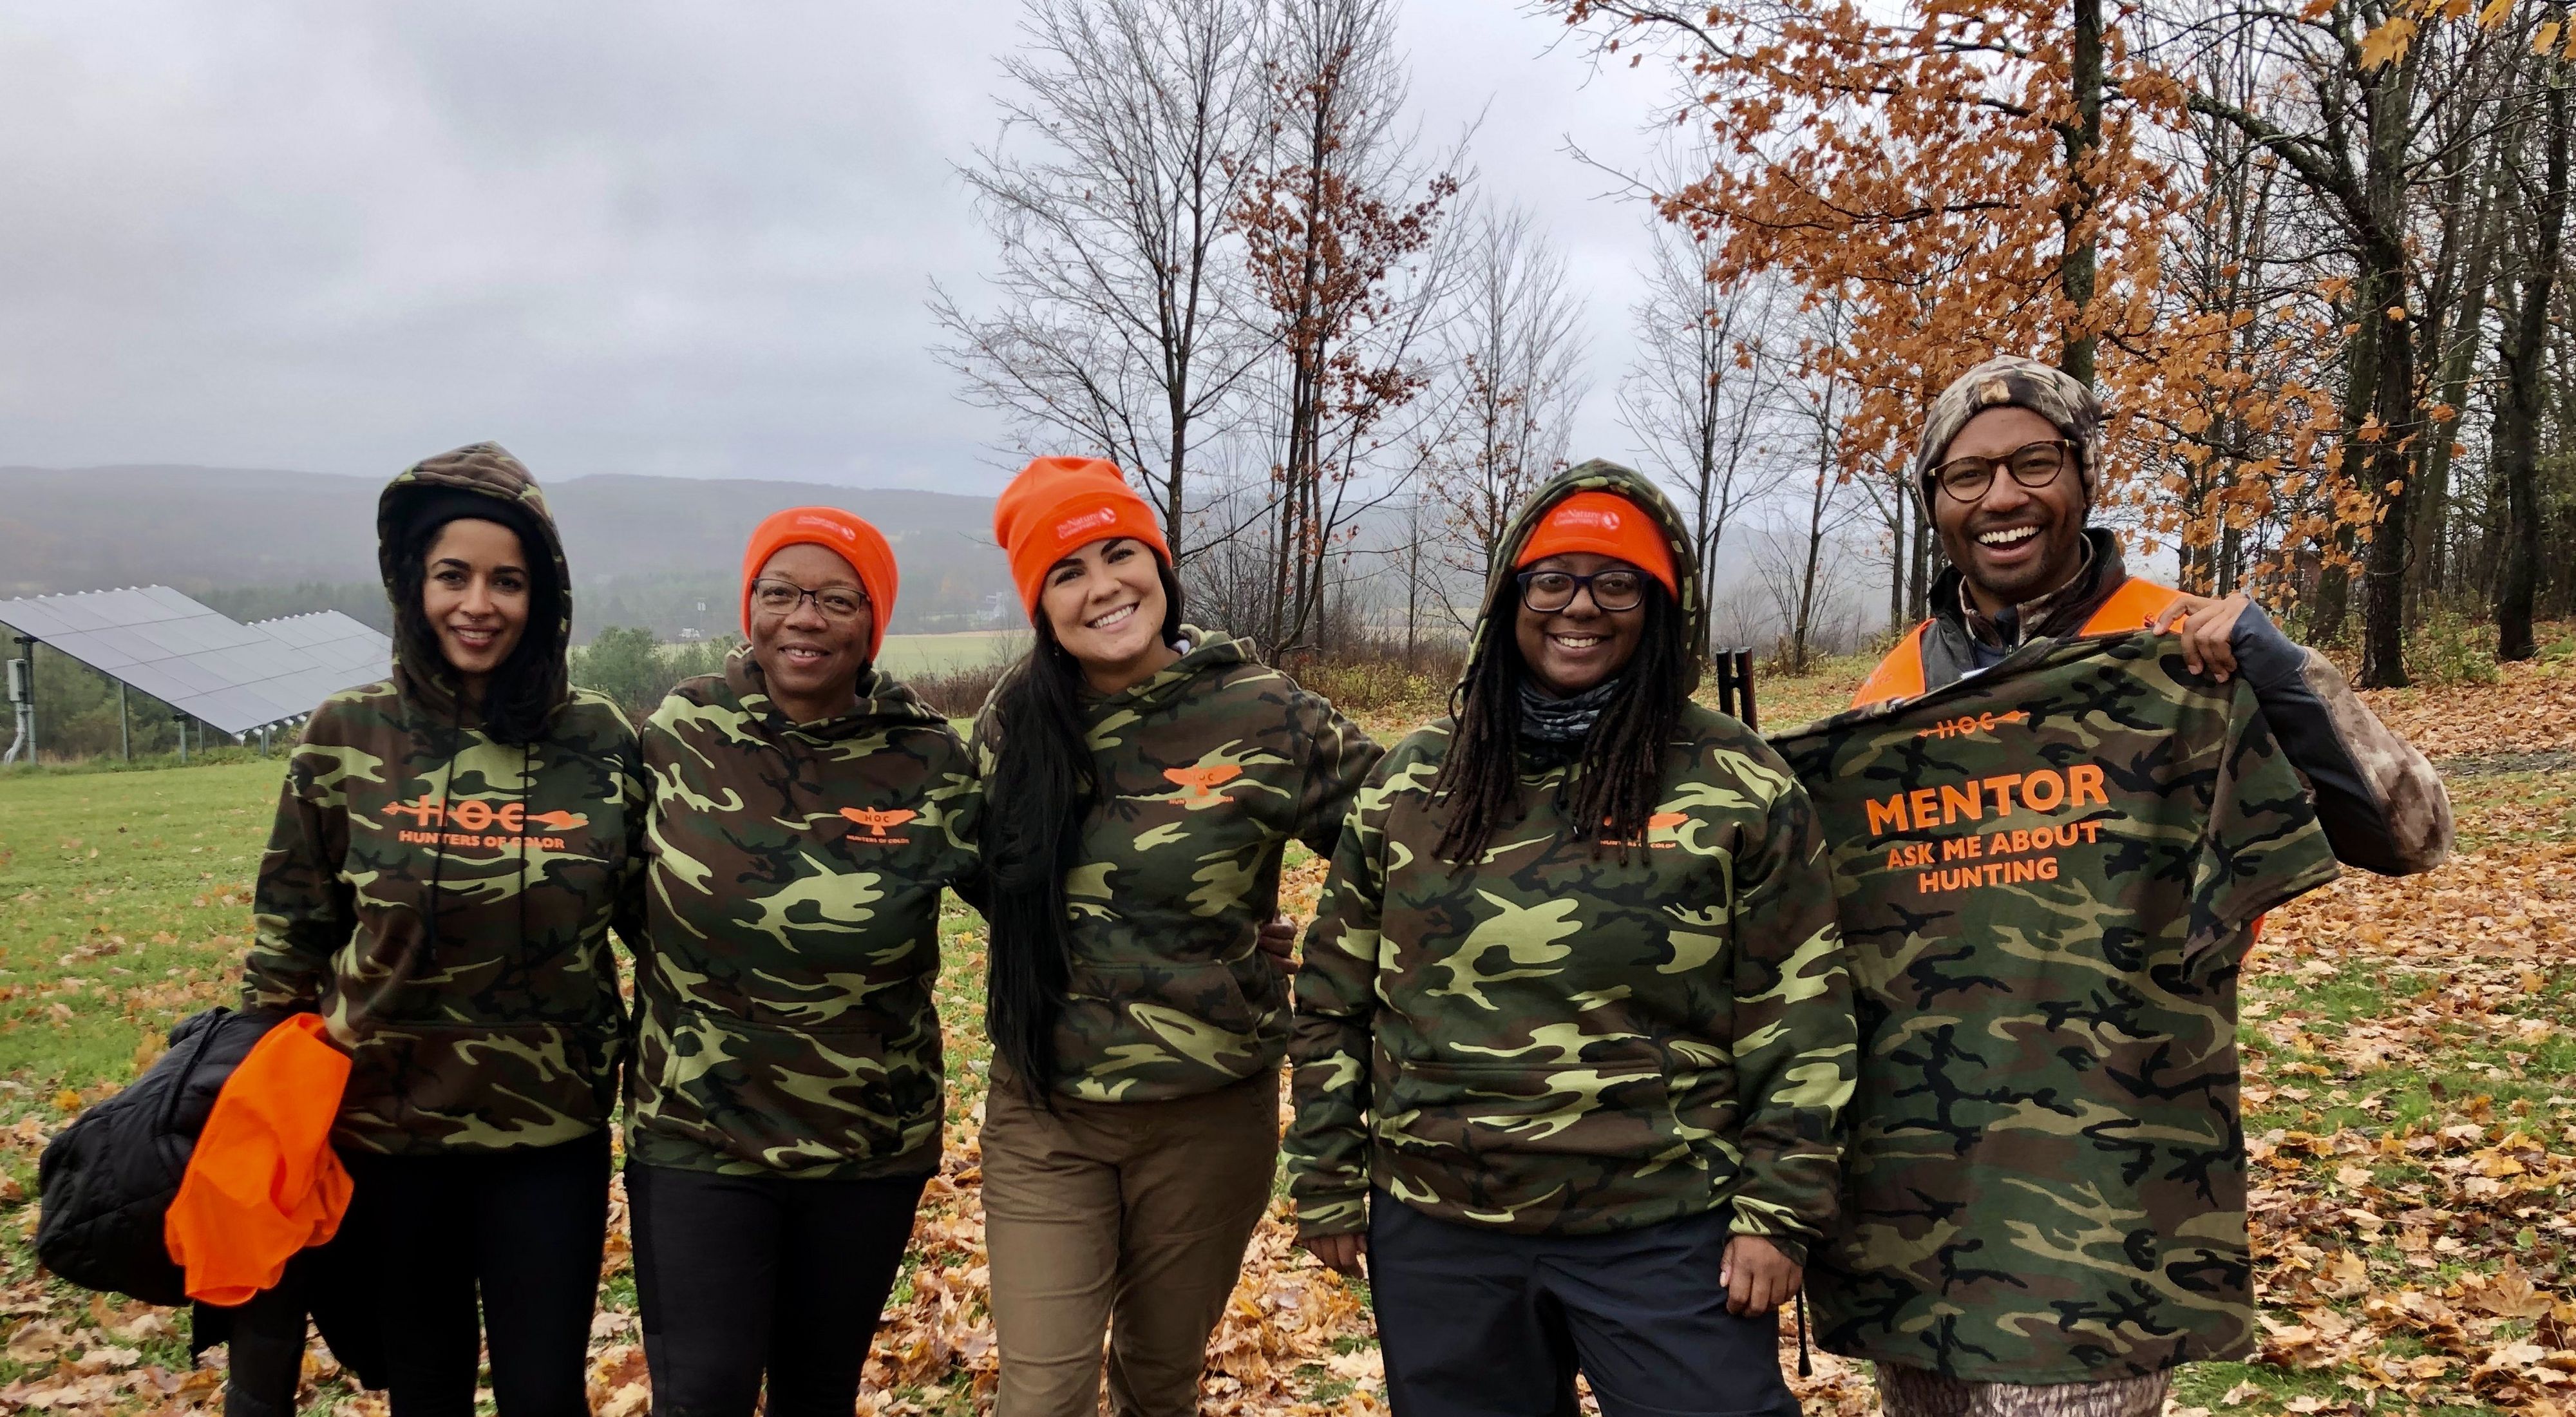 Five participants in the hunting weekend stand outdoors smiling at the camera. Each are wearing either a camouflaged t-shirt or sweatshirt that includes "HOC" printed.